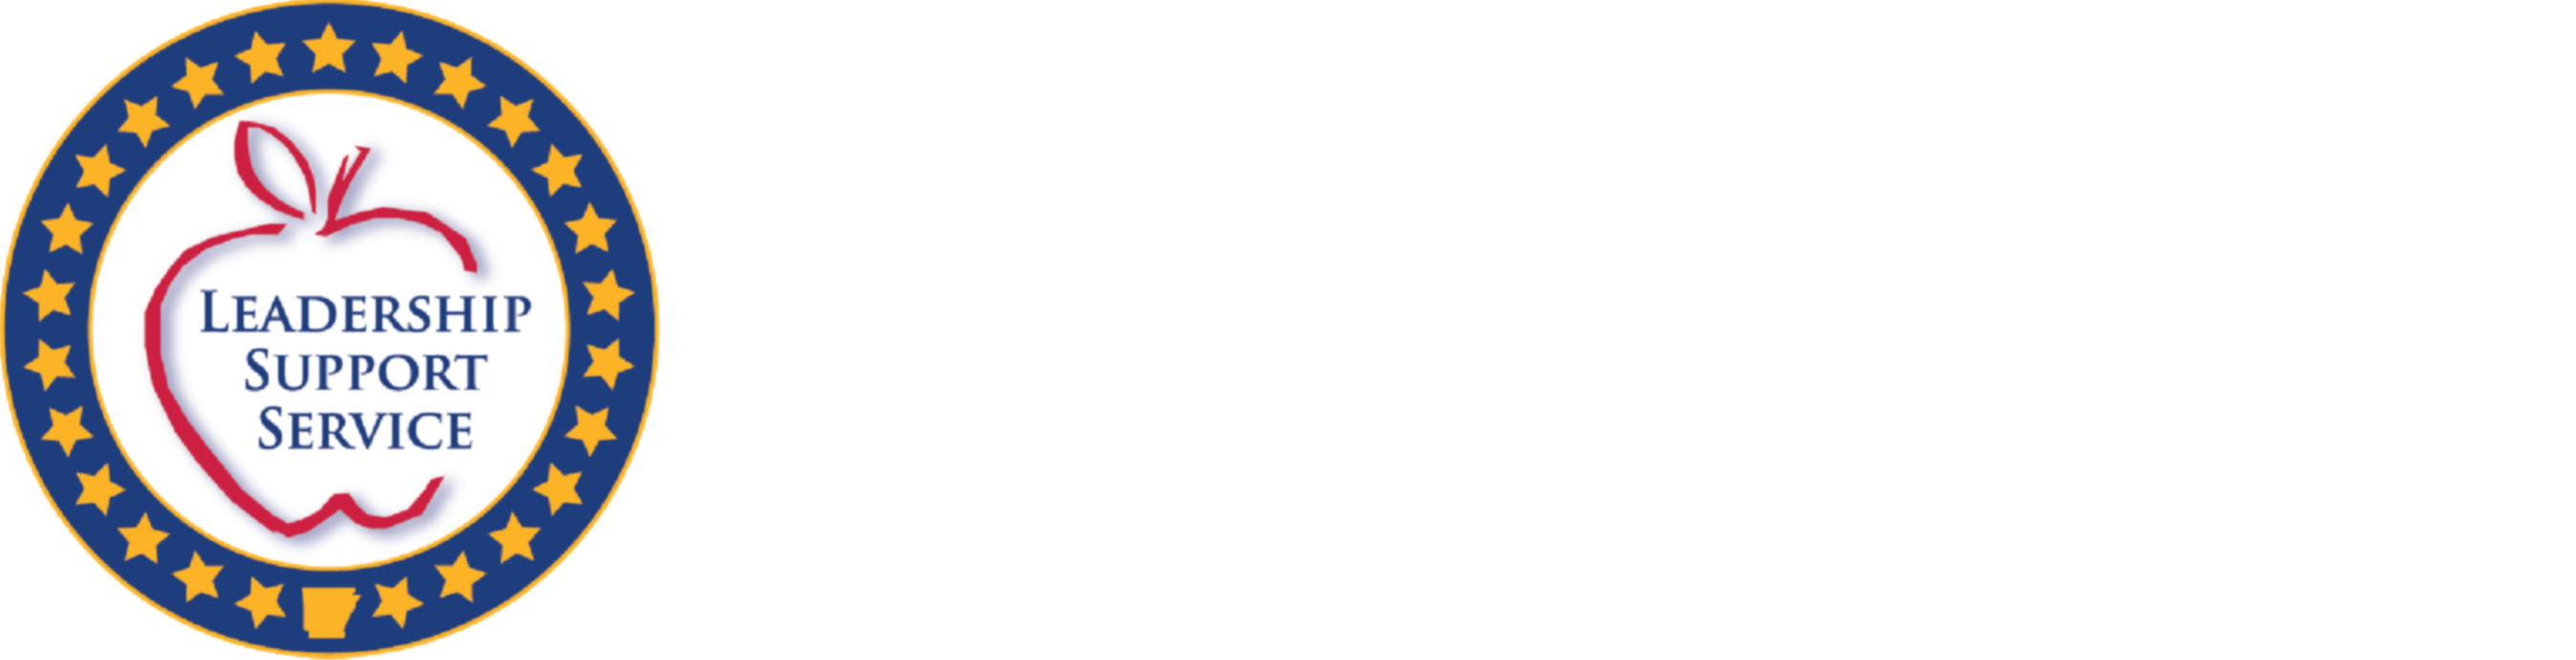 State Required Information Logo